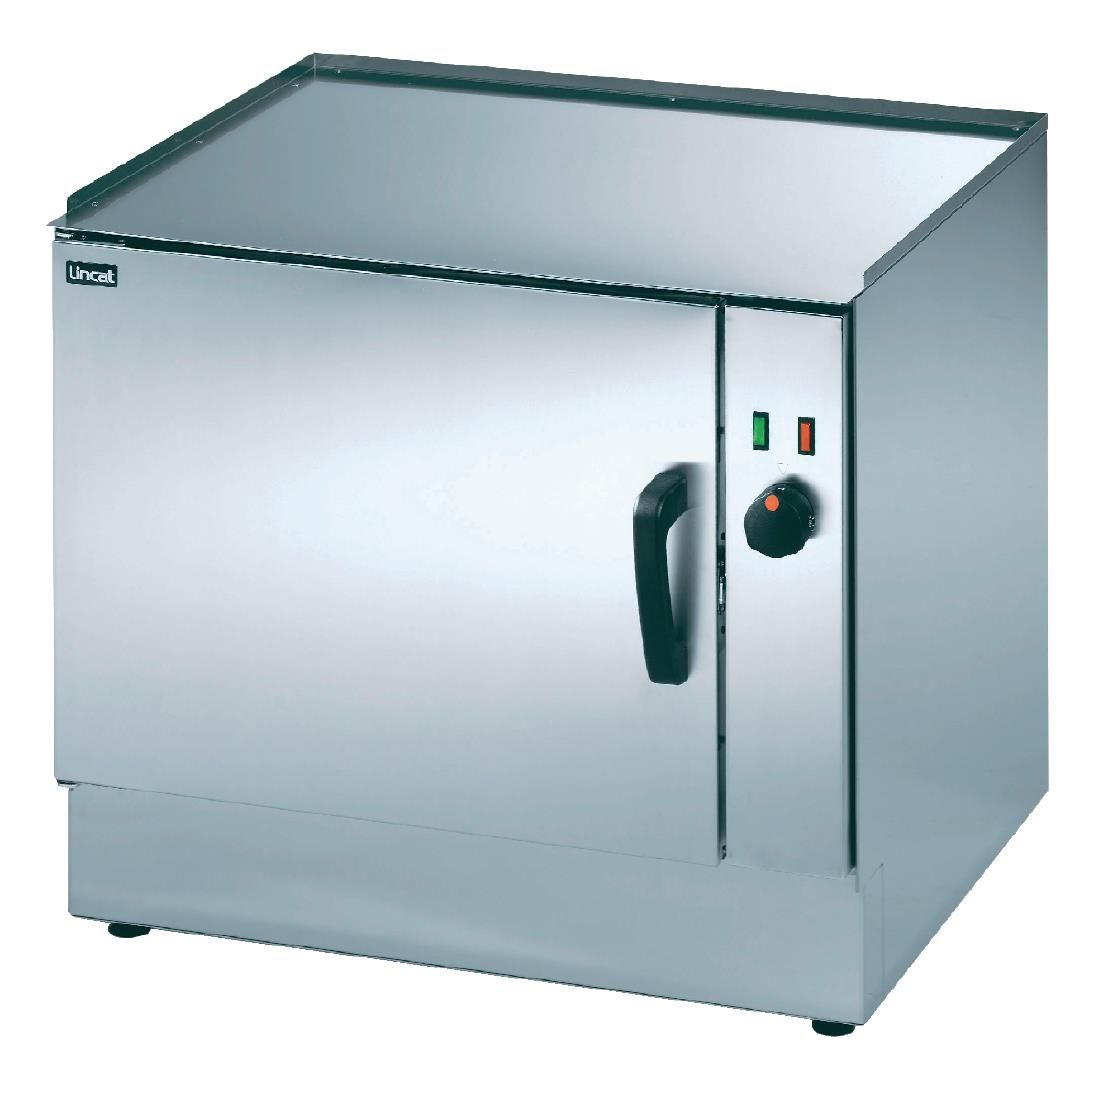 V7/4 - Lincat Silverlink 600 Electric Free-standing Oven - Fan-assisted - Larger size - W 750 mm - 4.0 kW E562